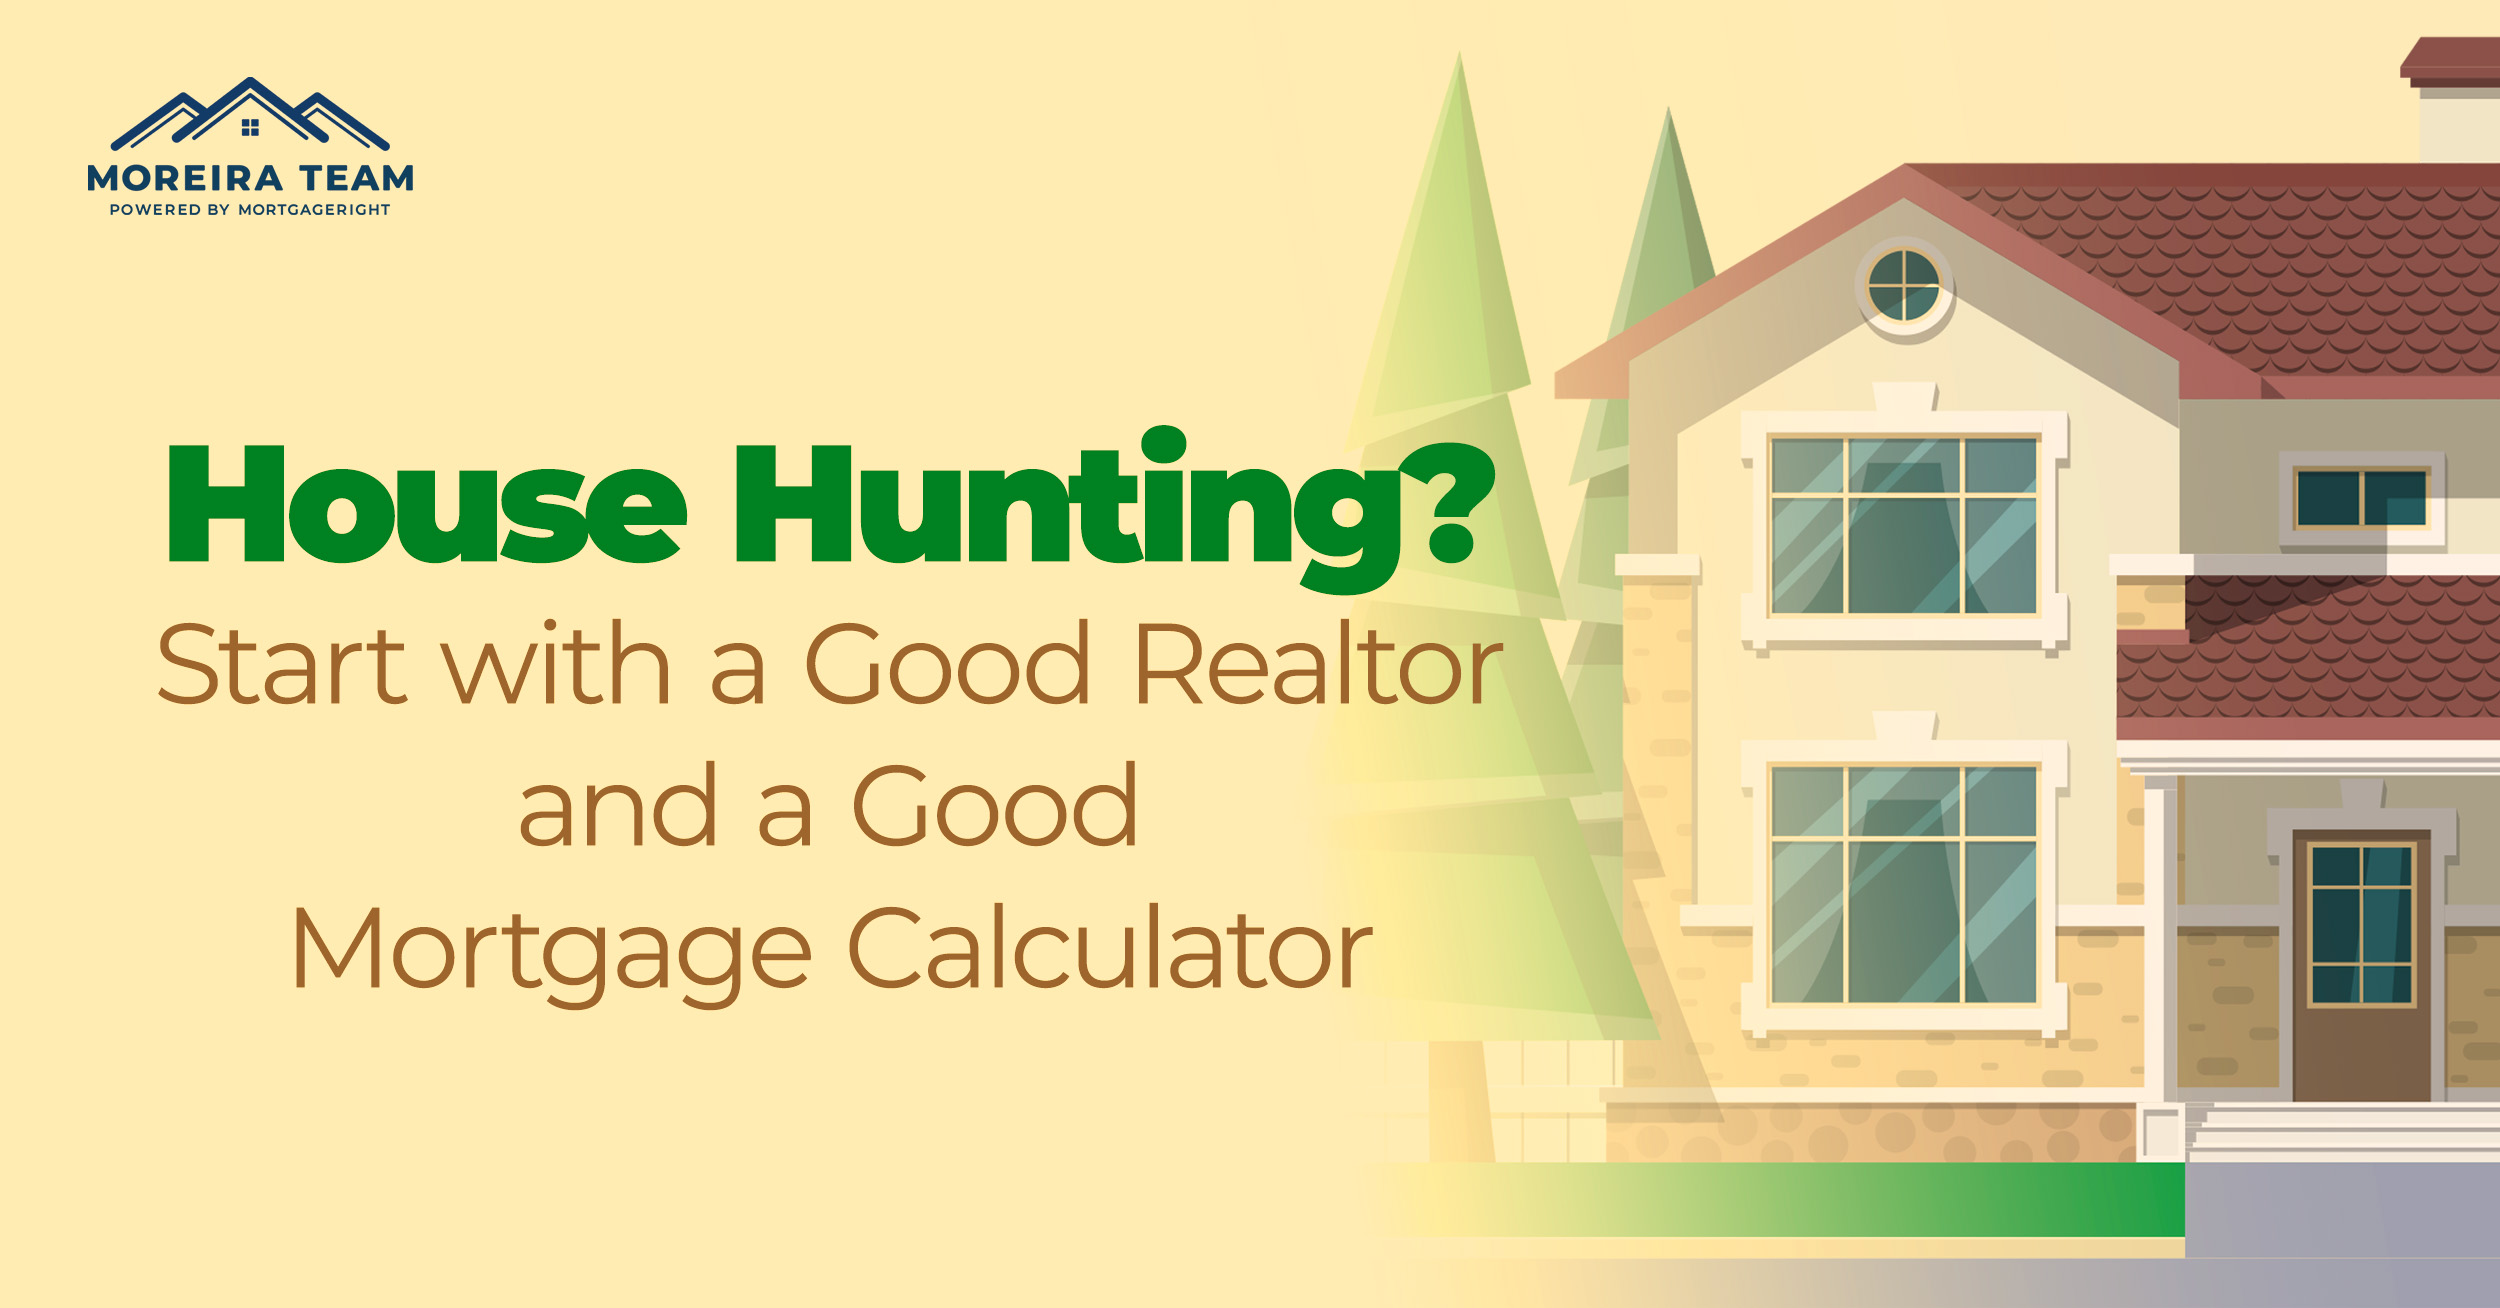 House Hunting? Start With a Good Realtor, and the Mortgage Calculator Georgia Residents Prefer